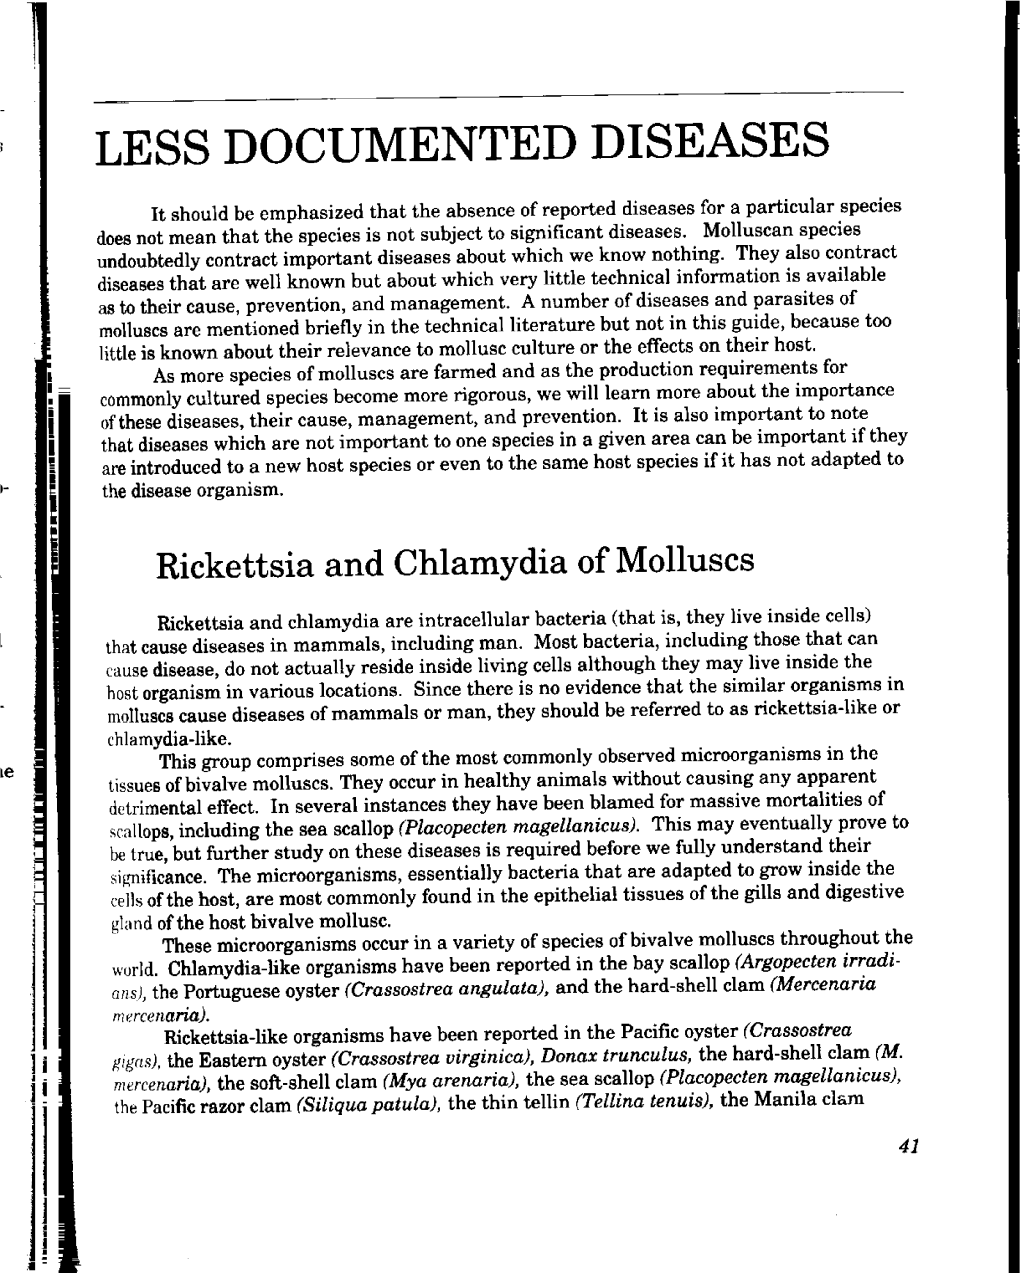 Less Documented Diseases